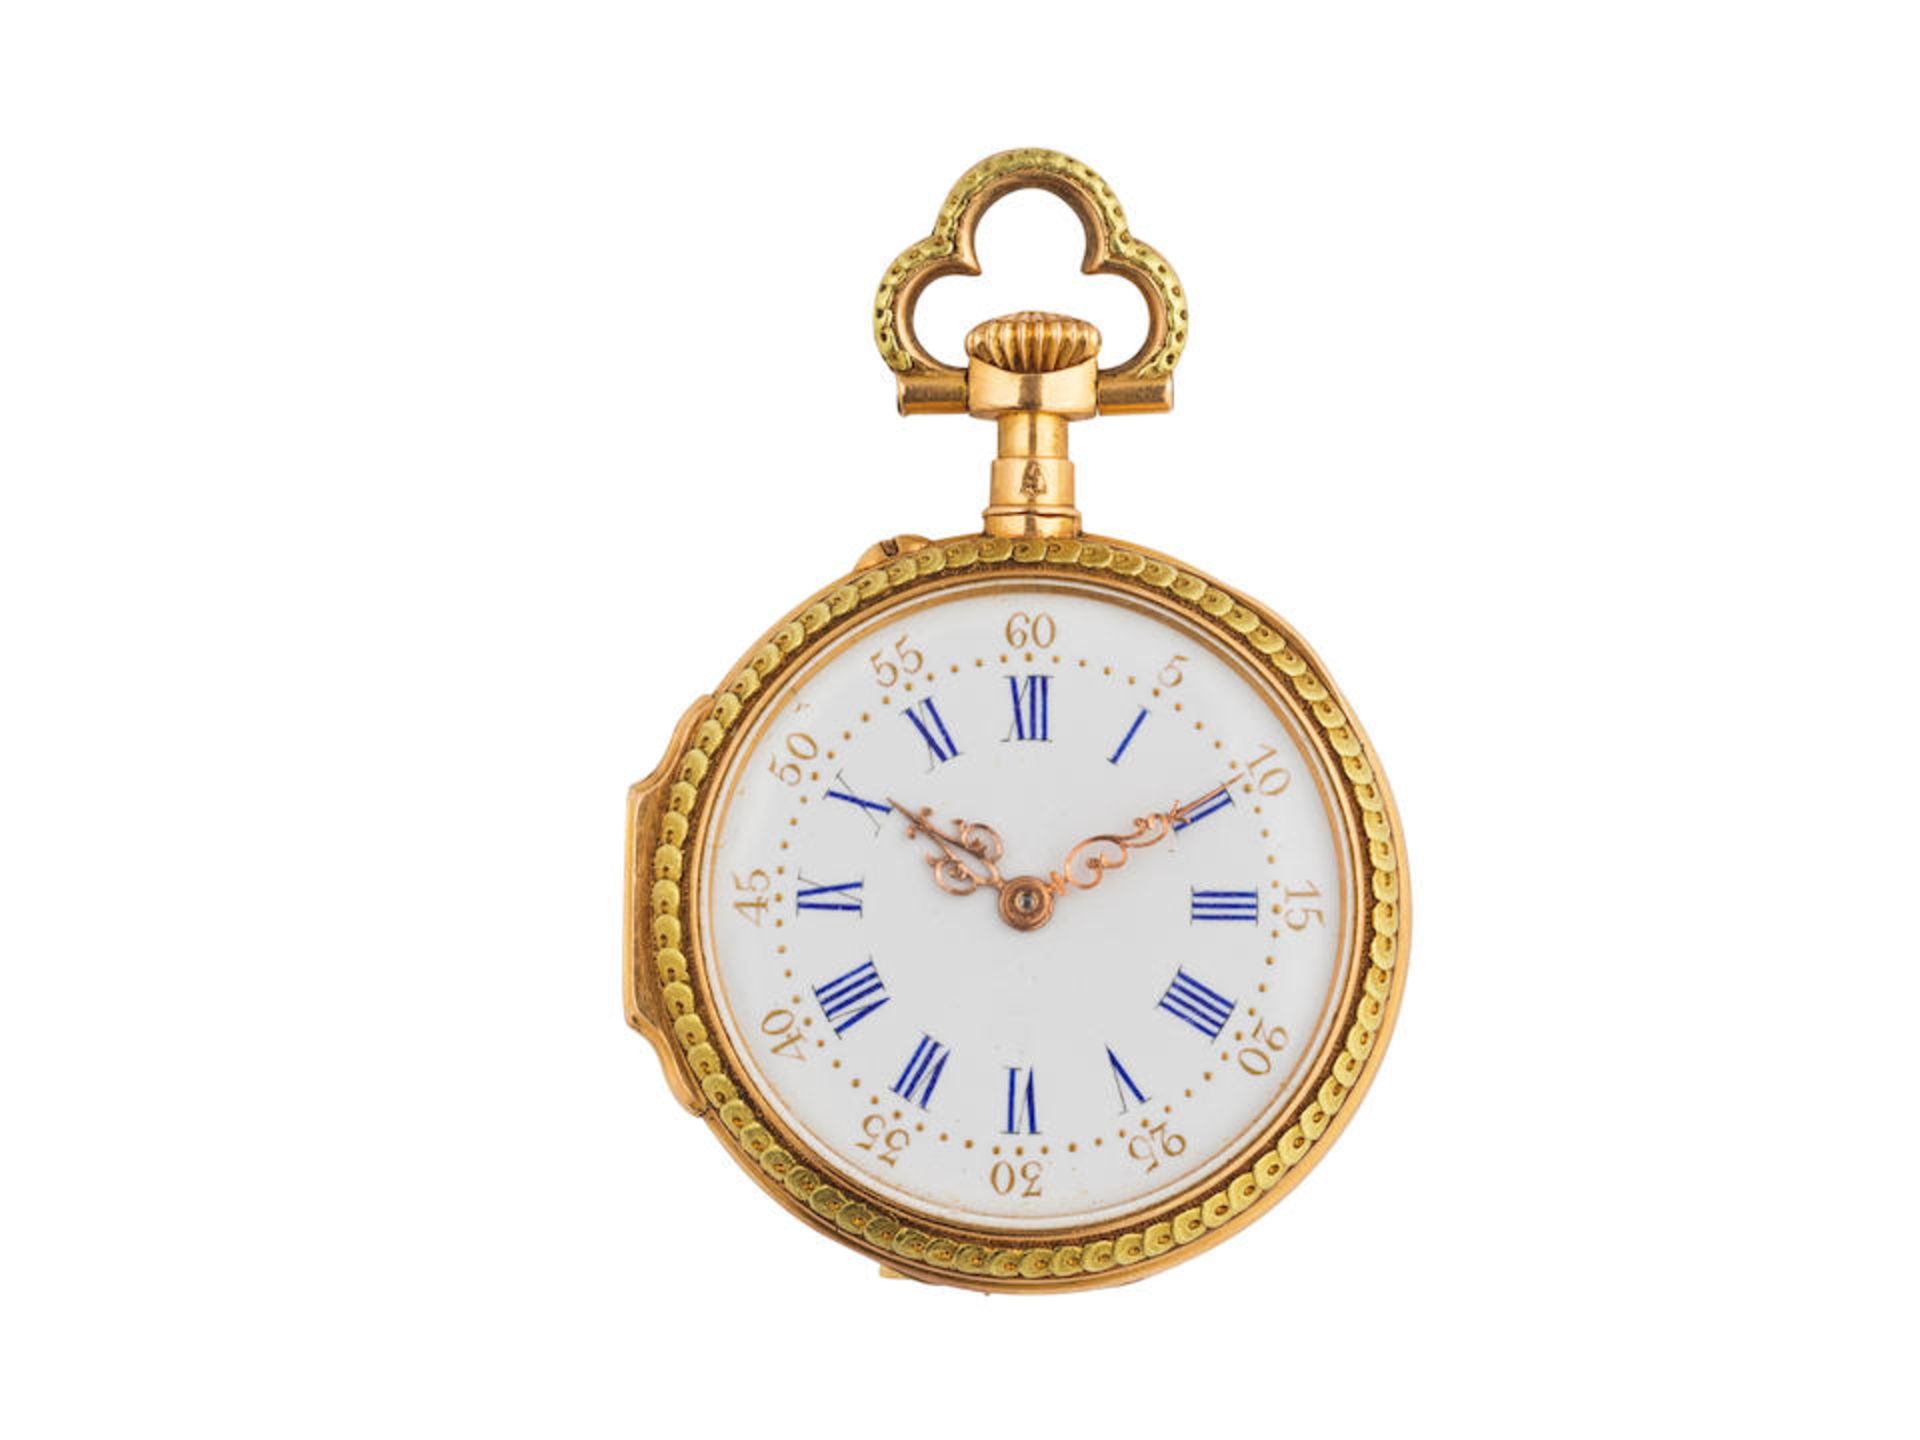 Leroy & Fils. An 18K gold open face keyless wind pocket watch with pearls Leroy & Fils. Montre d... - Image 3 of 3